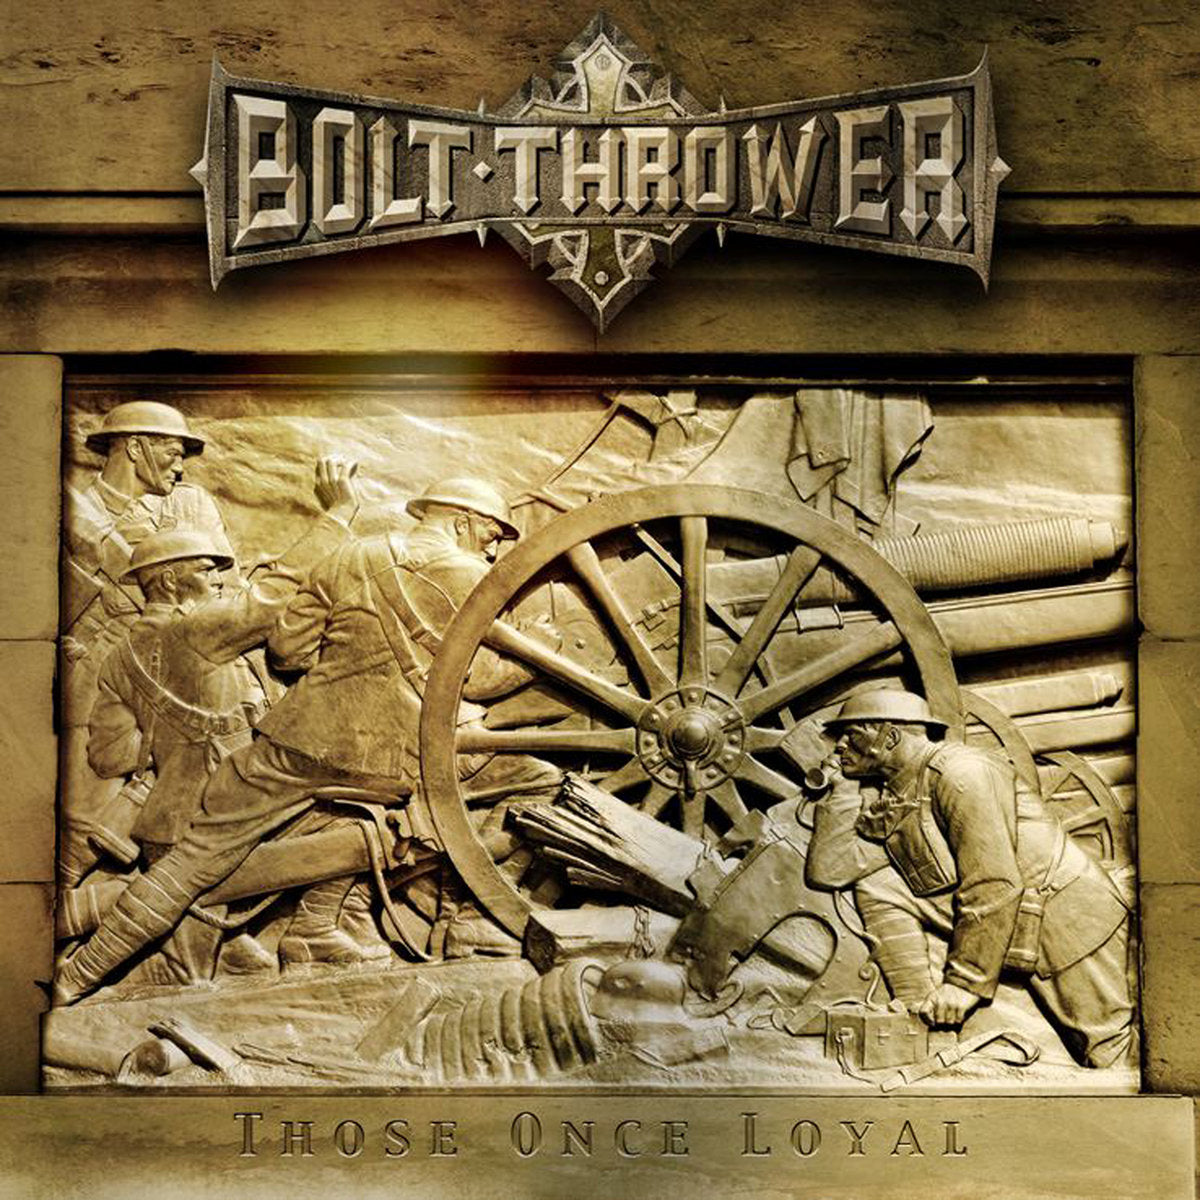 [SOLD OUT] BOLT THROWER "Those Once Loyal" vinyl LP (gatefold, lim. 500 w/ giant poster)